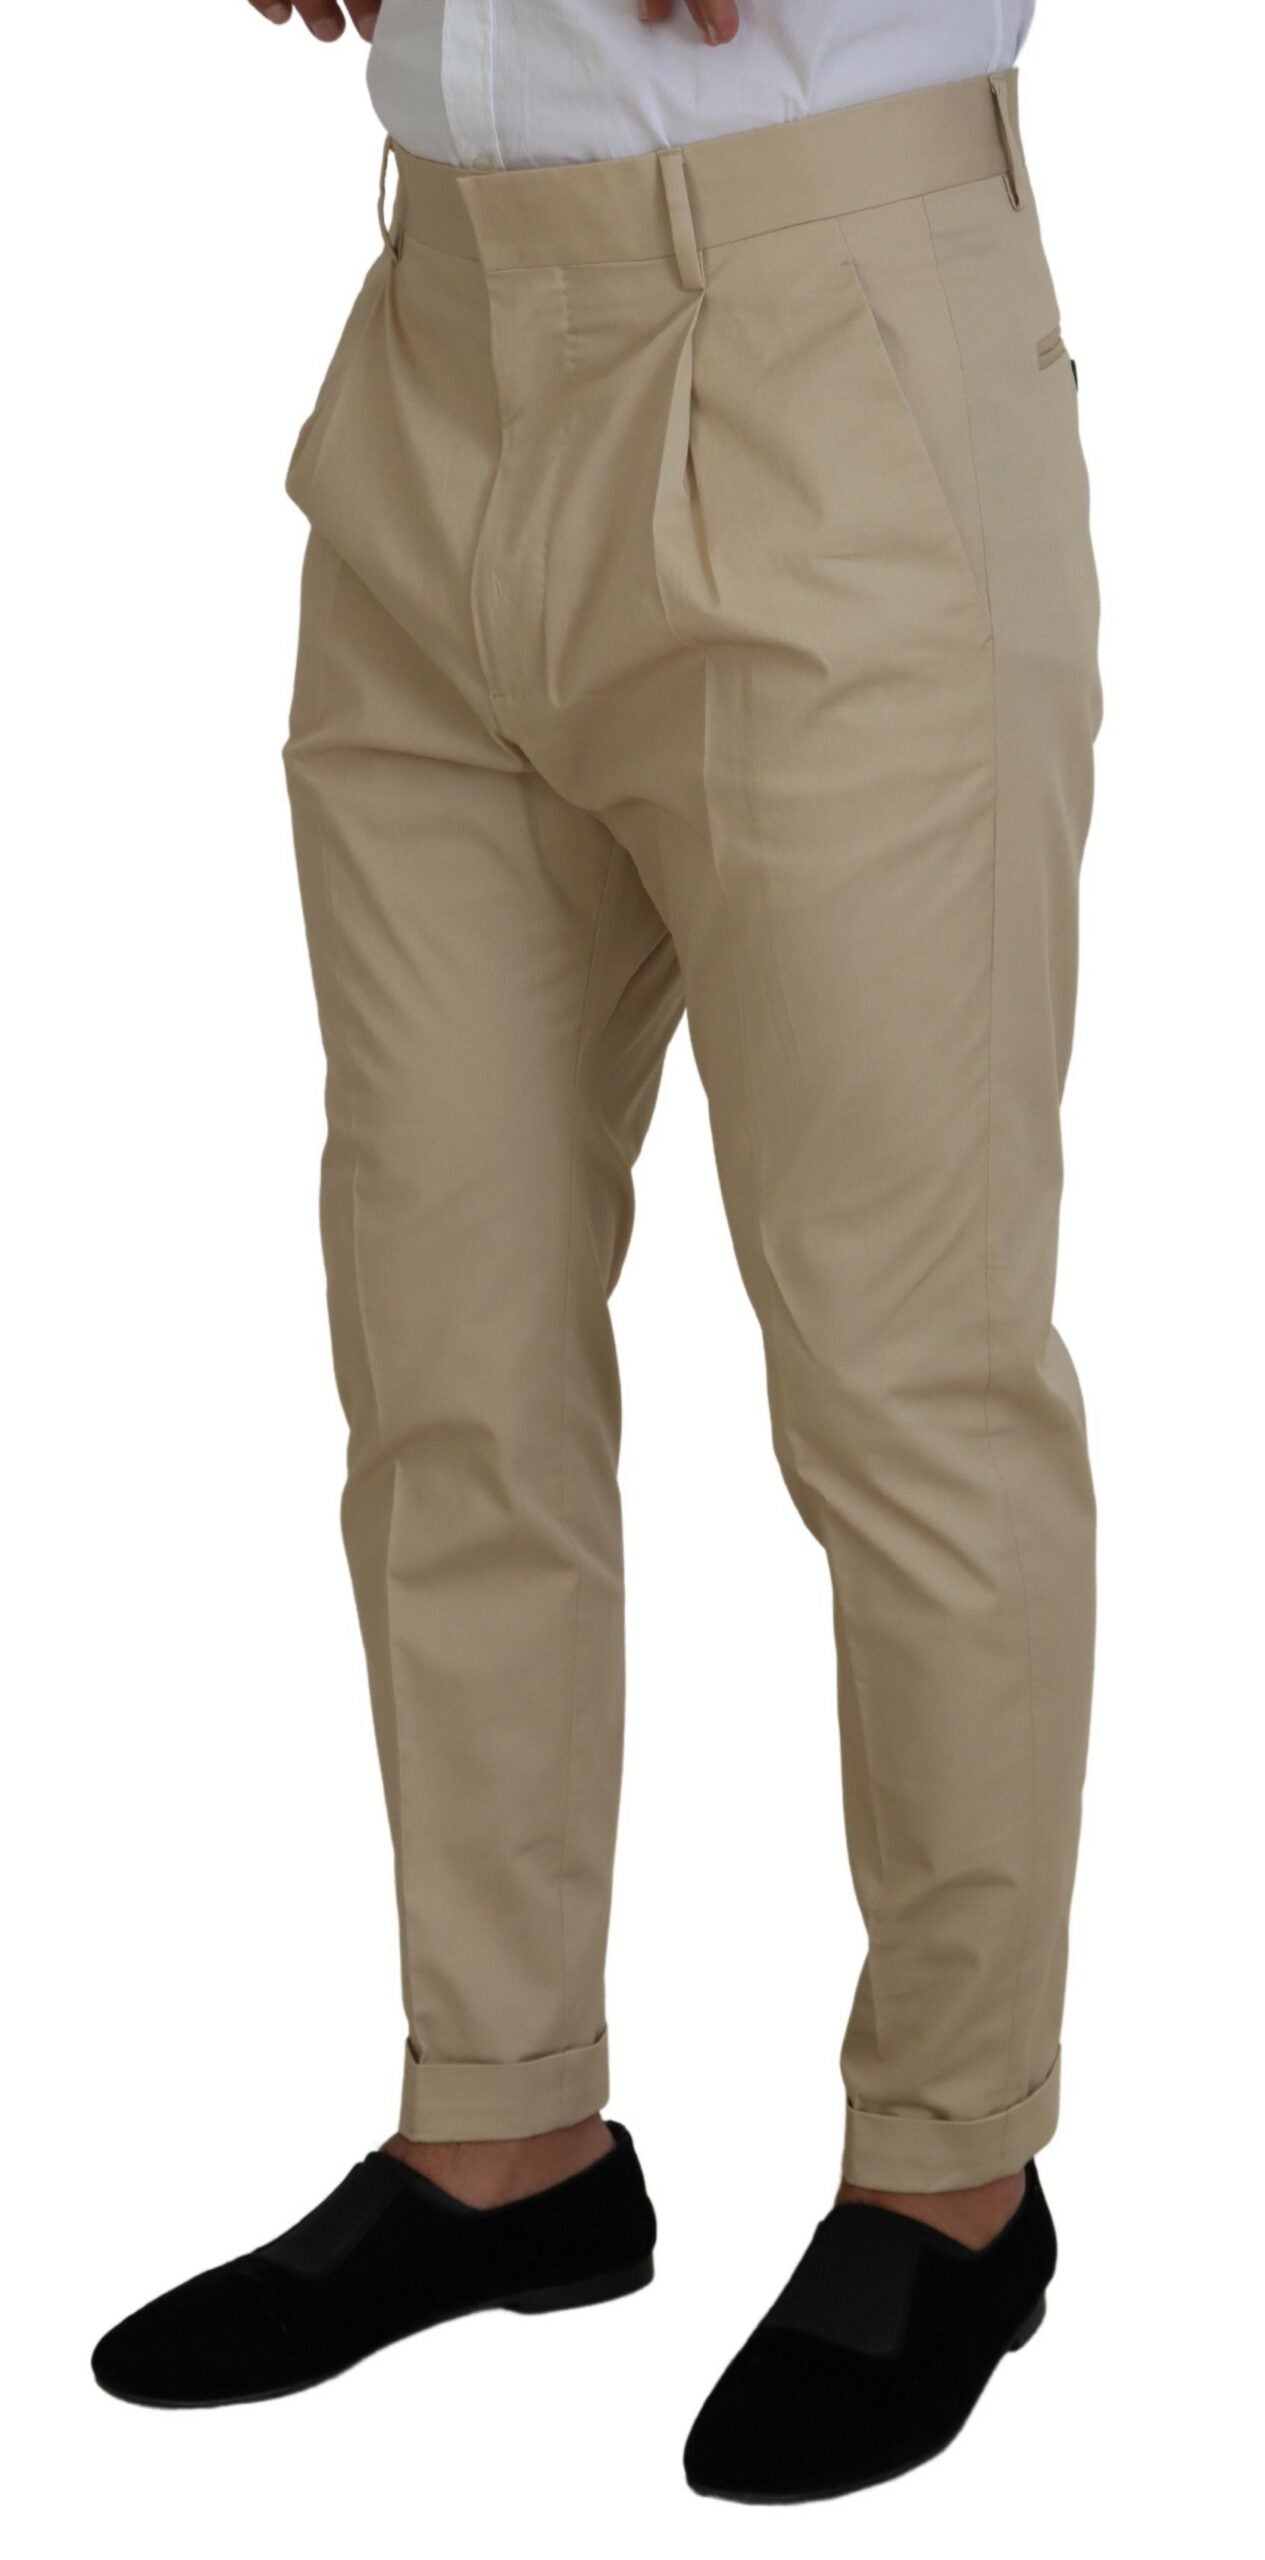 Dsquared² Beige Cotton Single Breasted 2 Piece CIPRO Suit